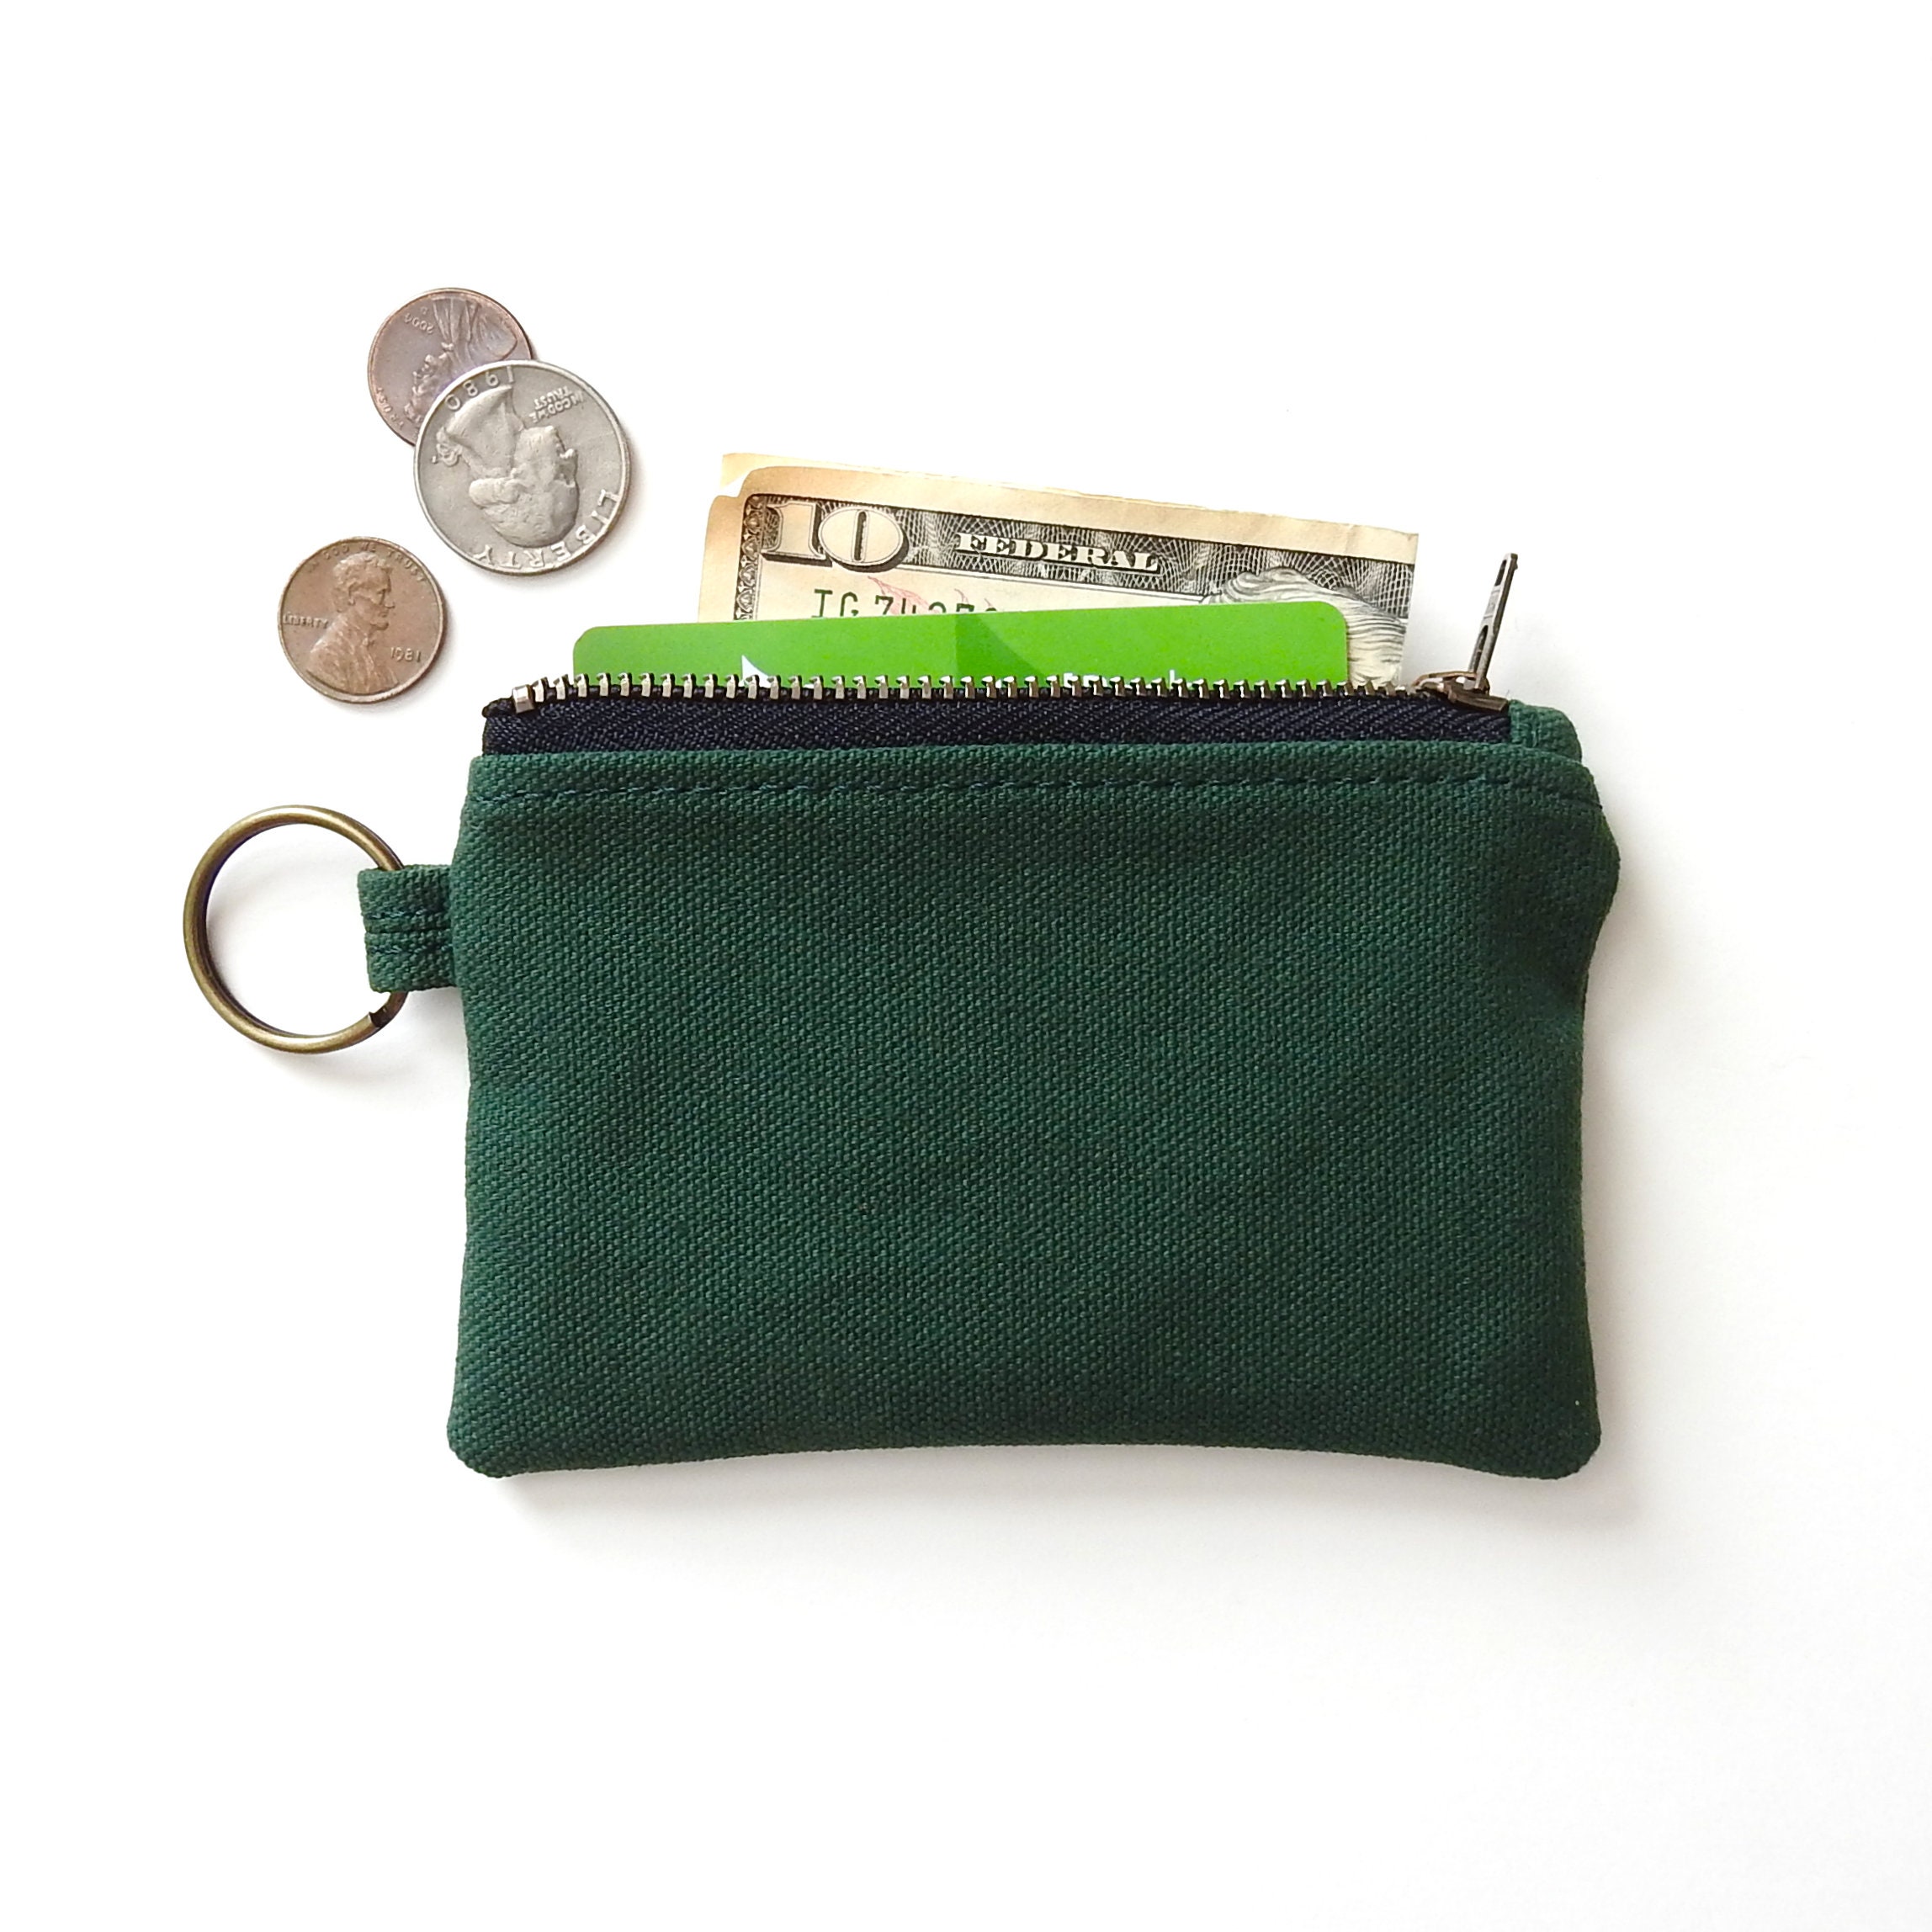 Green Canvas Keychain Wallet Coin Purse Pouch. Handmade by | Etsy